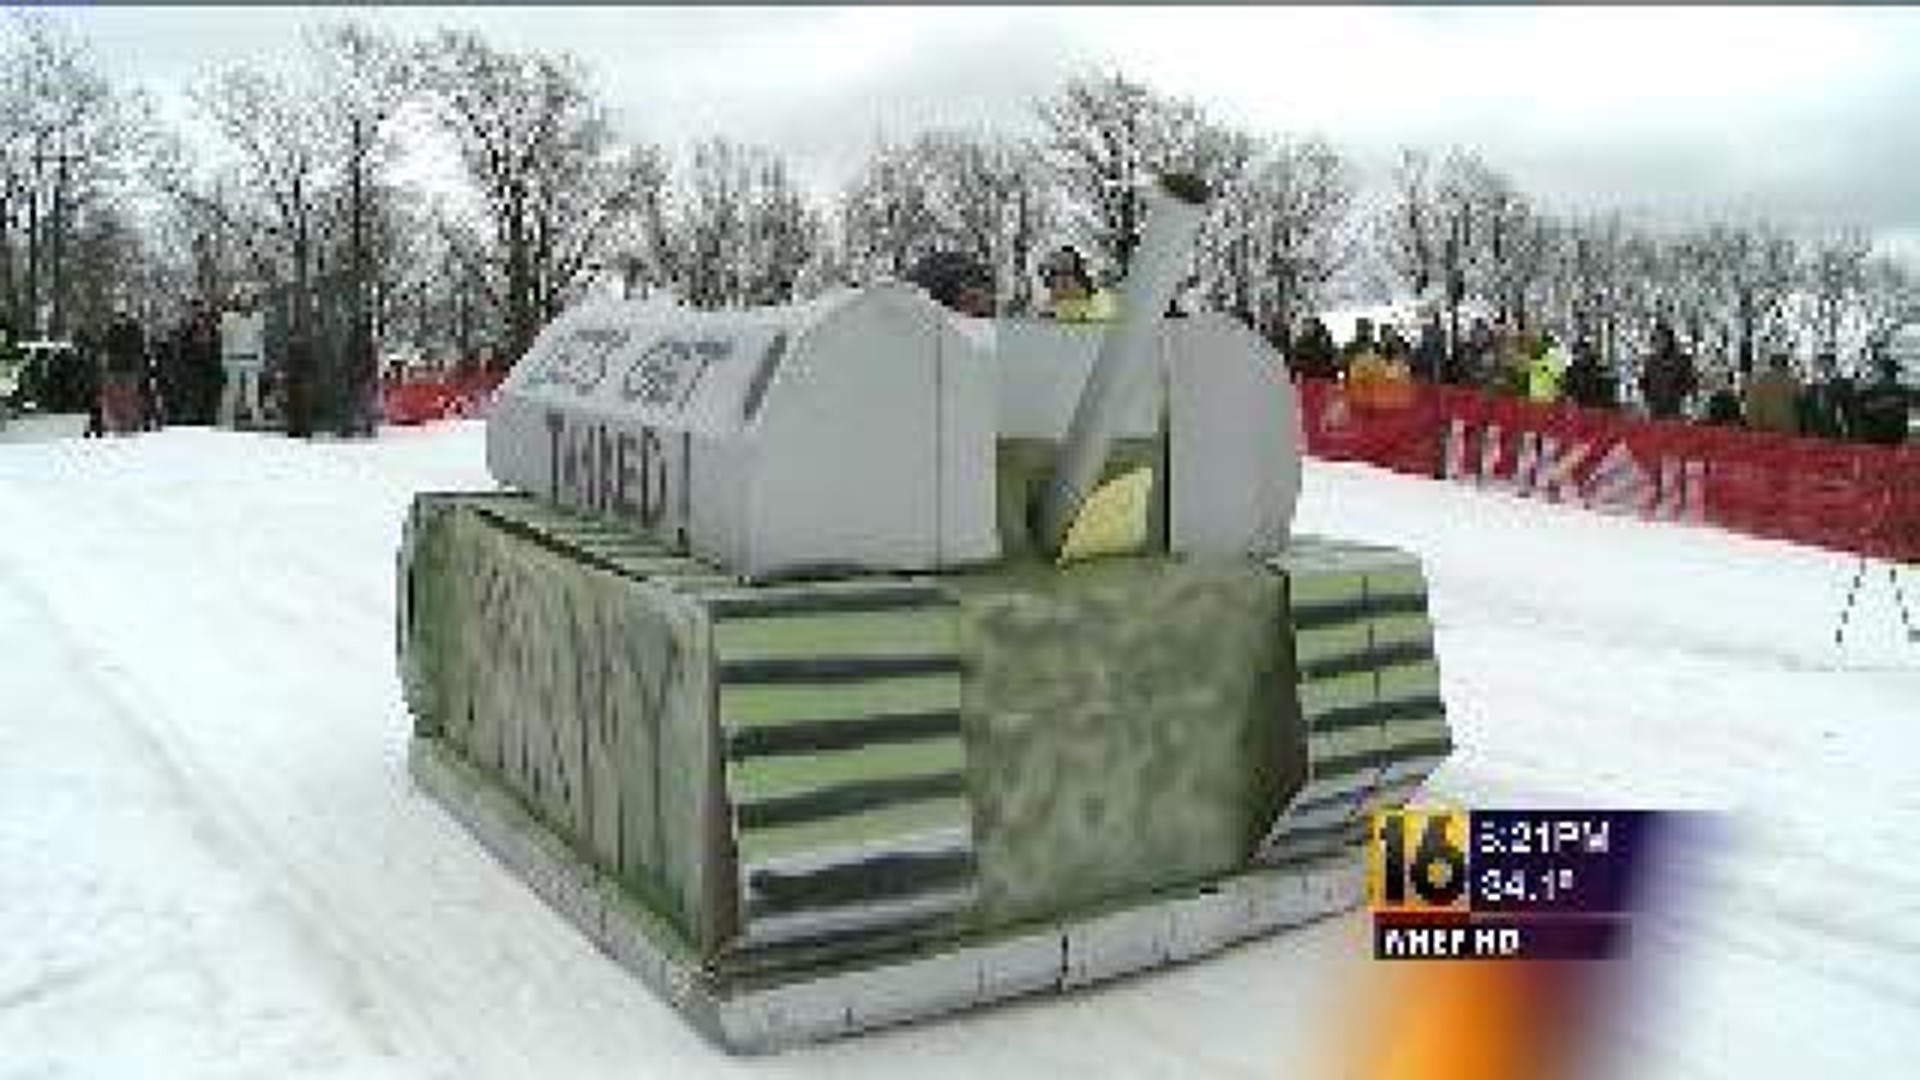 Crafts Of Cardboard Cruise Down Slopes